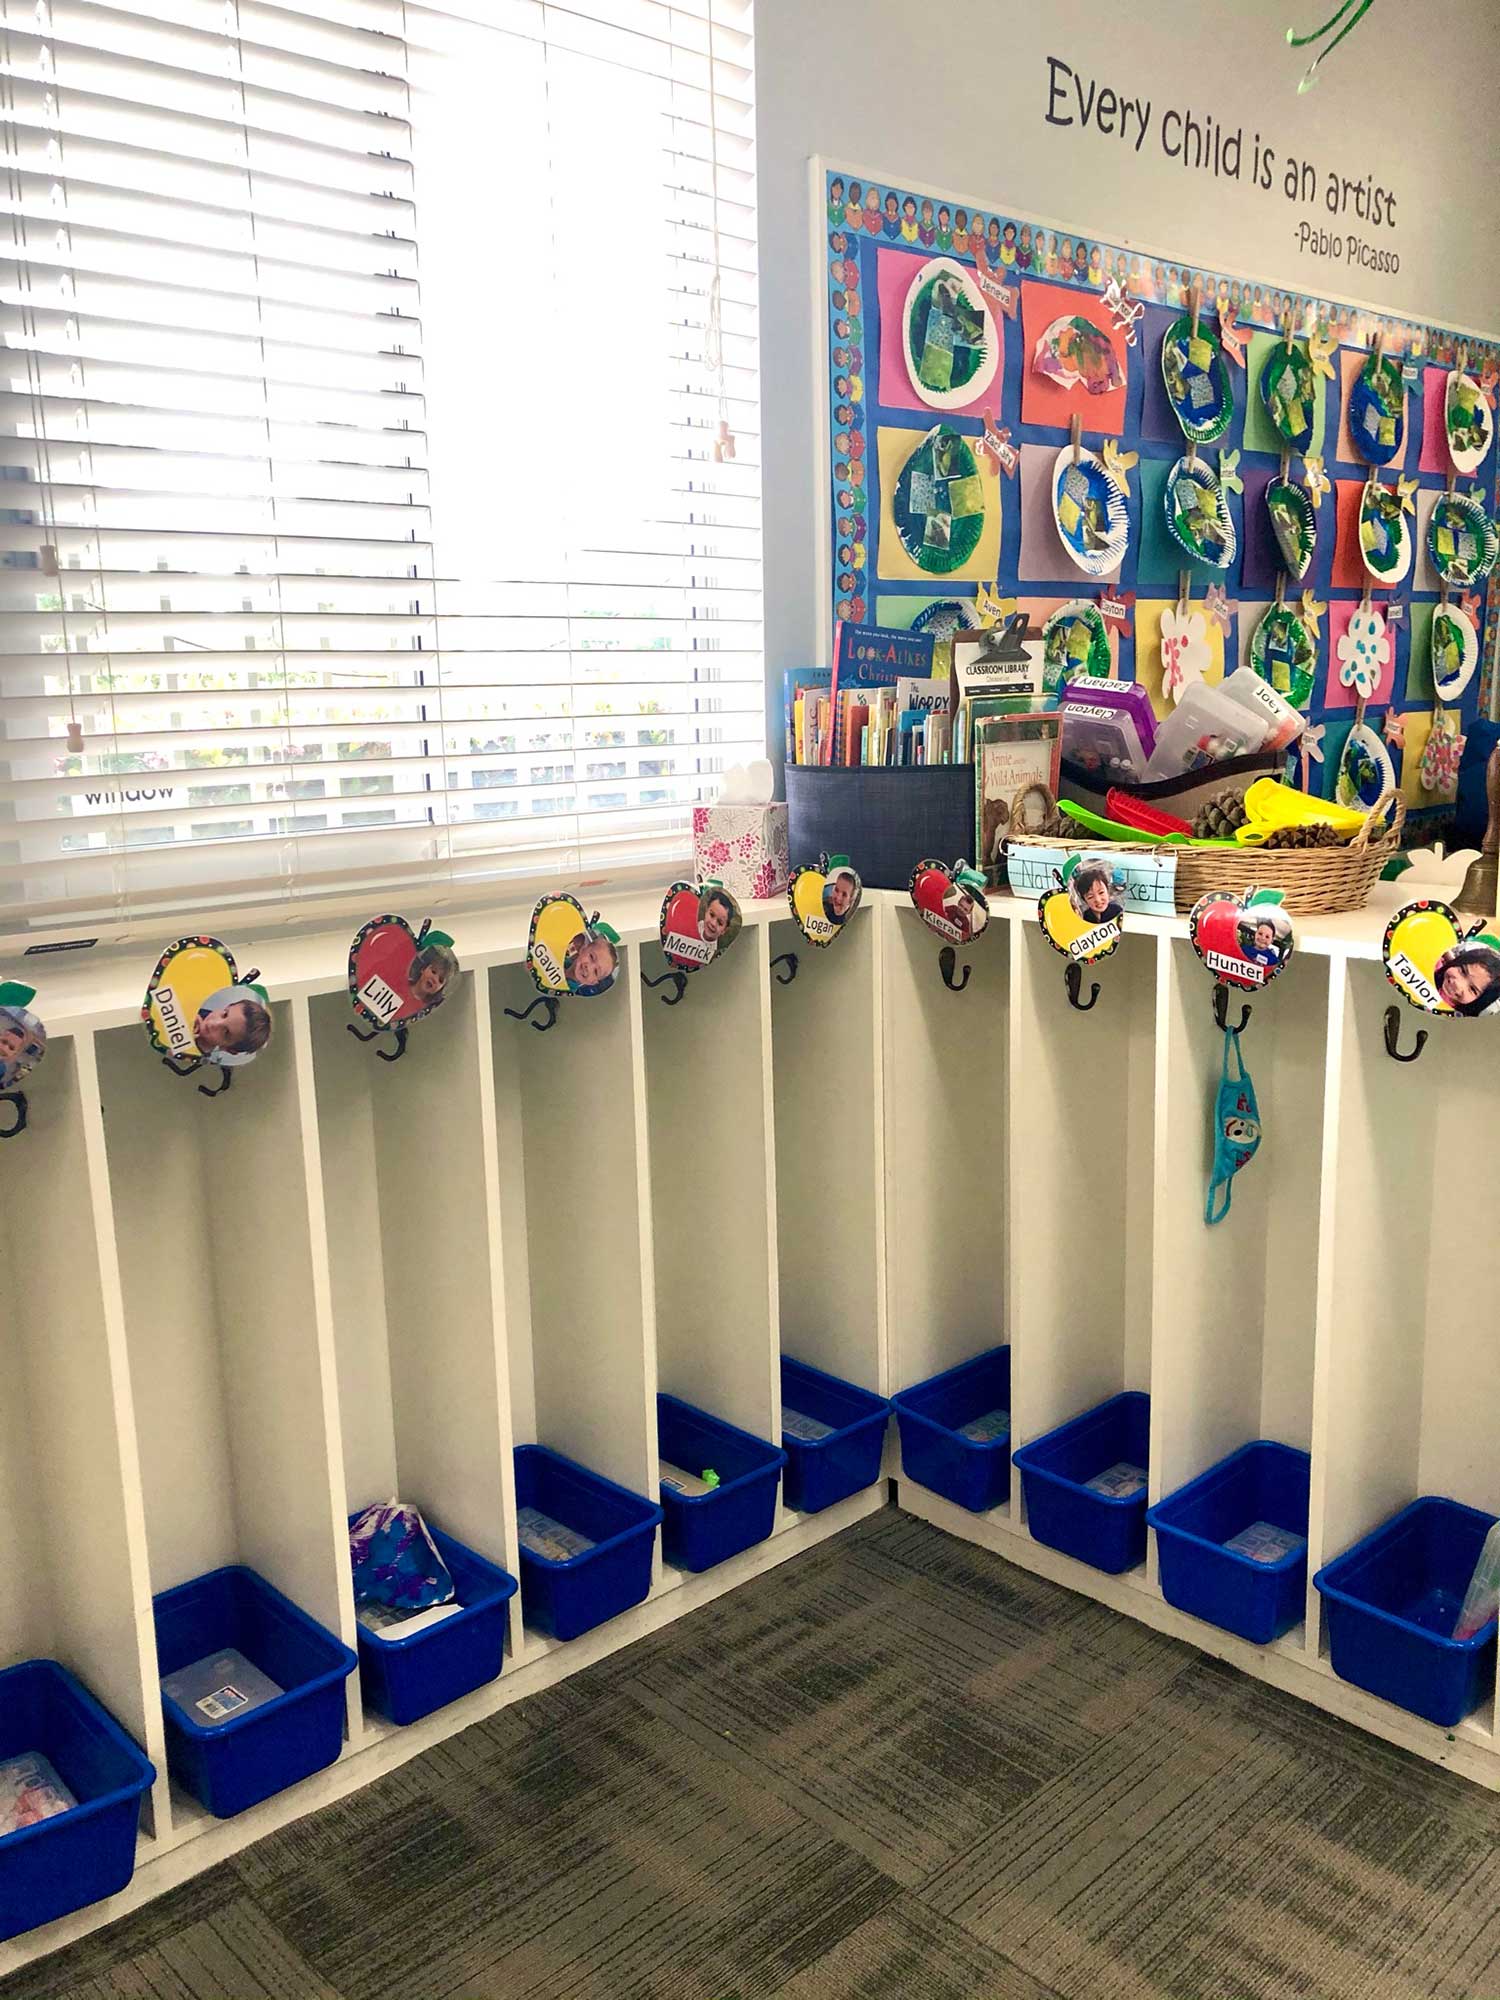 Row of Cubbies Labeled With Each Child's Photo